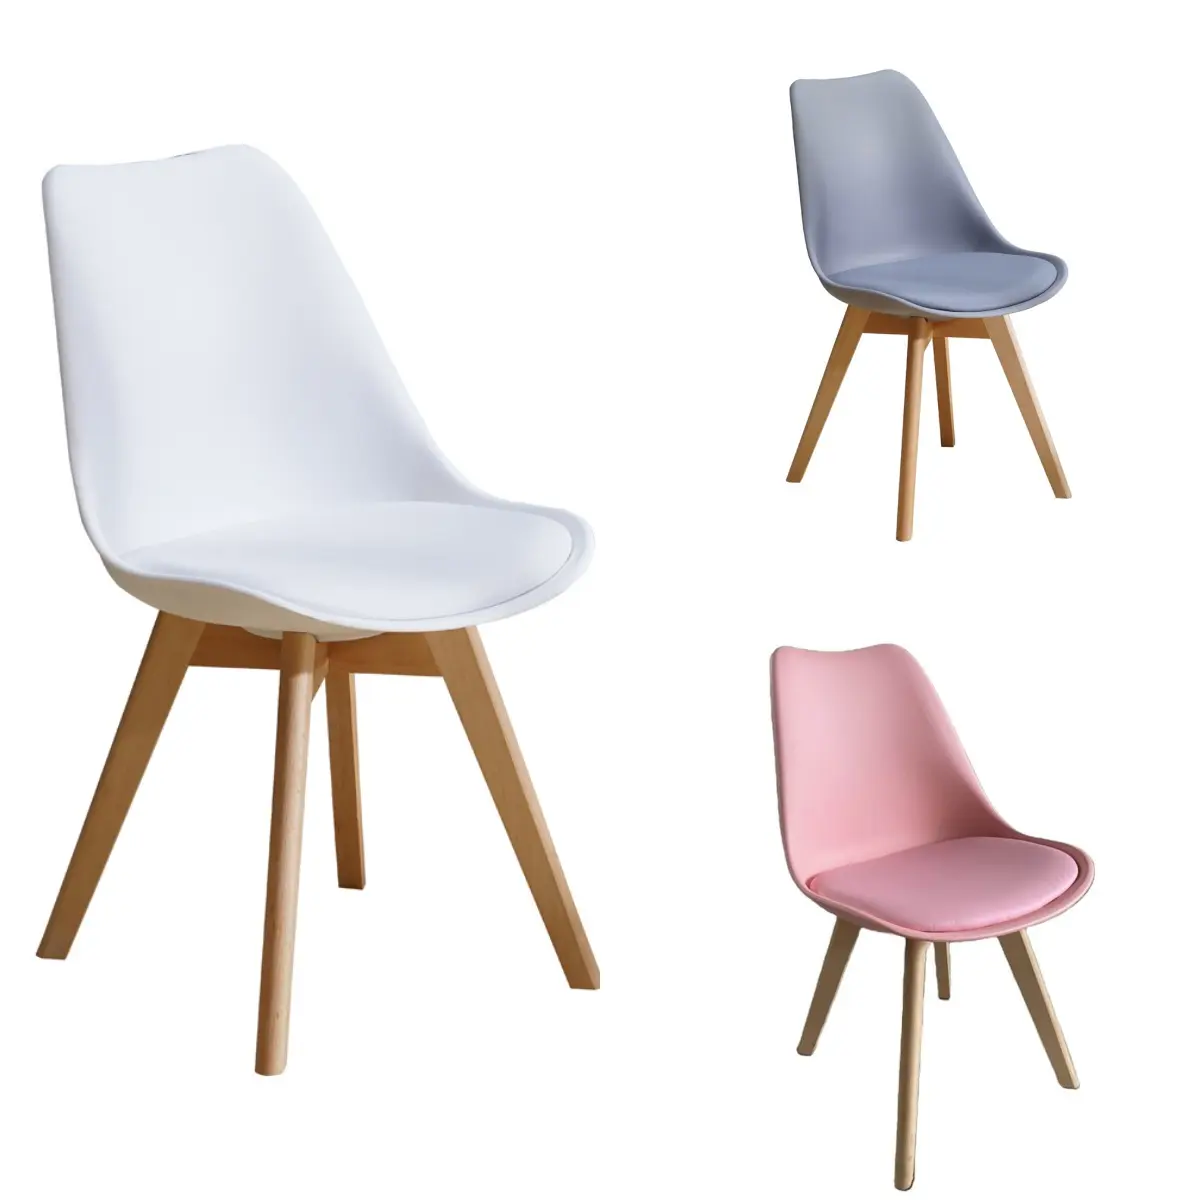 Cheap Modern Design Contemporary Classic White Pink Plastic Dining Chairs with Wood Legs Sillas de comedor